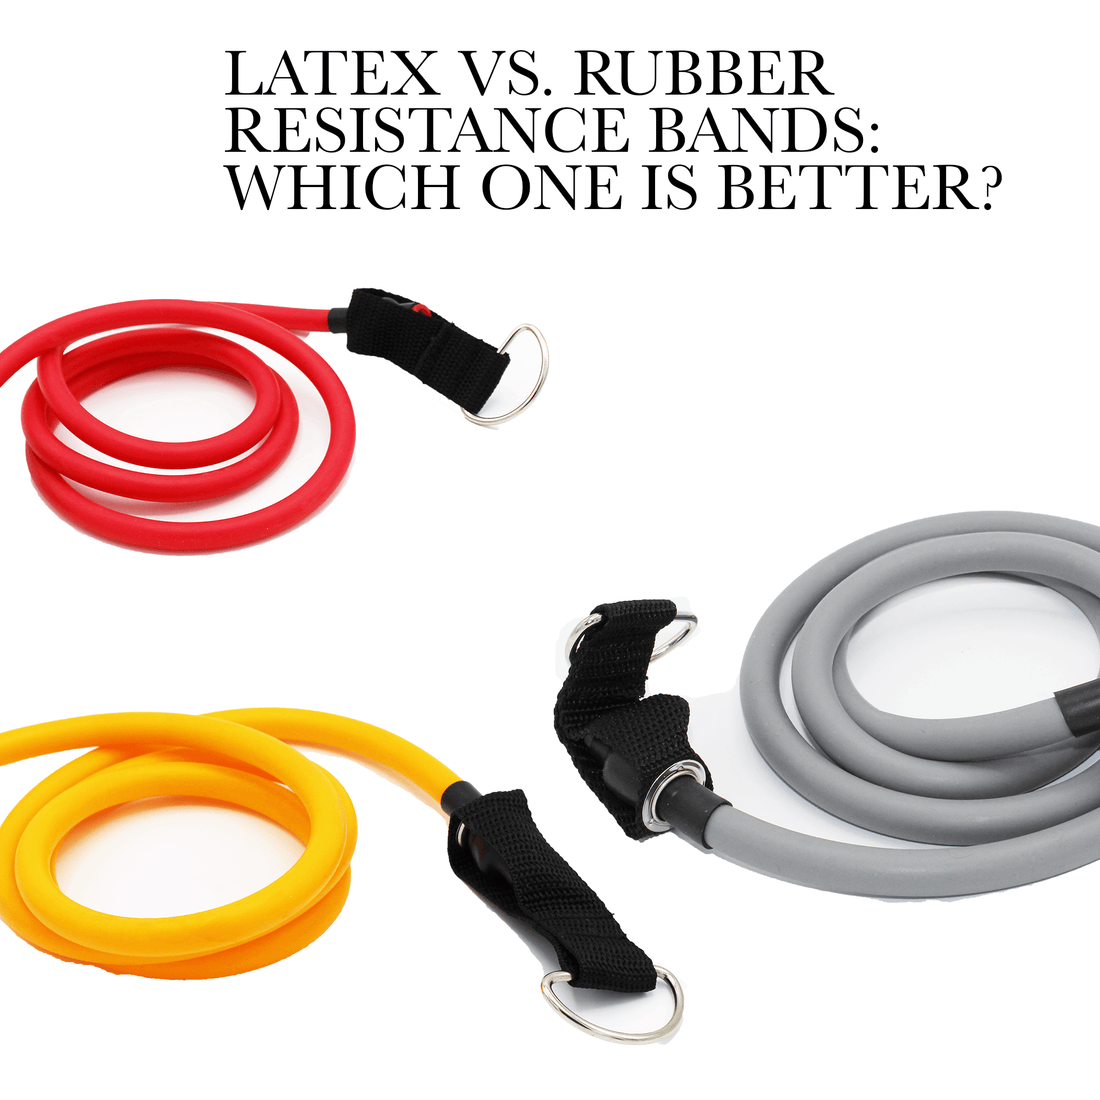 Latex vs. Rubber Resistance Bands: Which one is better? - Fitness Health 